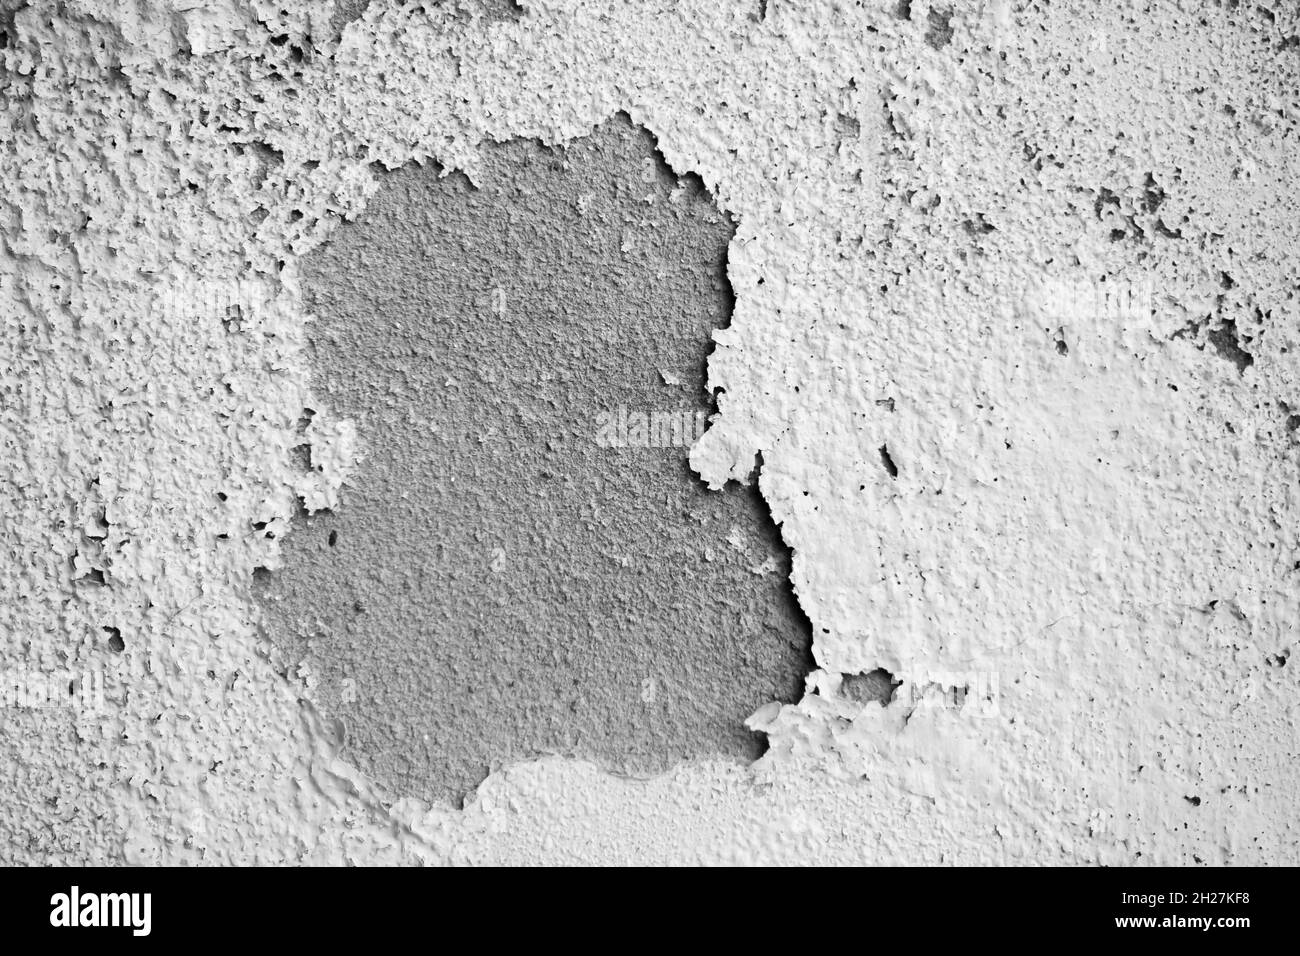 fugl Ugle omdrejningspunkt White damp wall showing paint cracking open and breaking or peeling off.  The fragile white lining of the walls. Abstract cracked and swollen  black-whi Stock Photo - Alamy